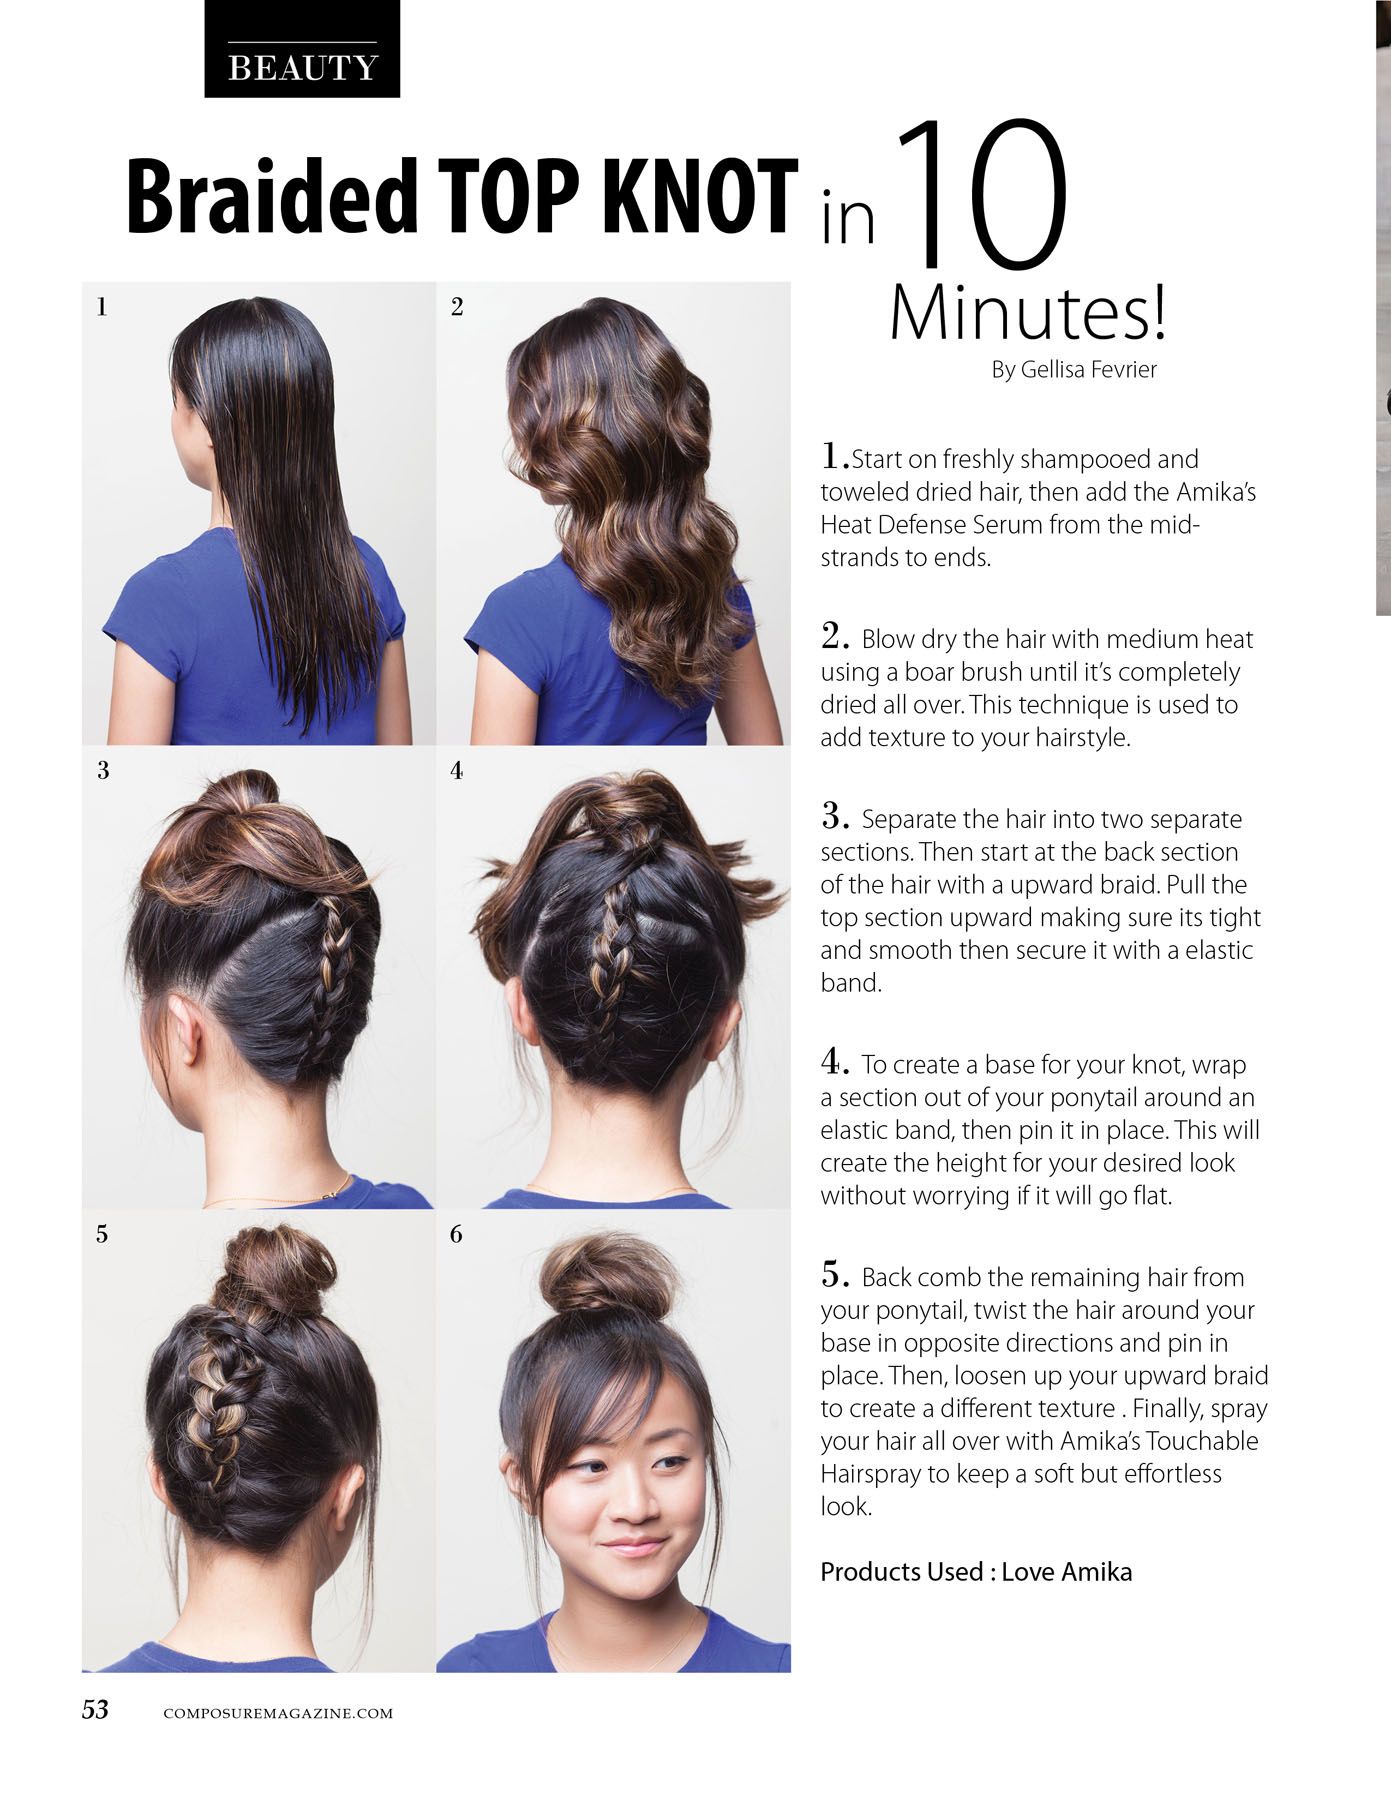 Braided Top Knot in 10 minutes! – Composure Magazine